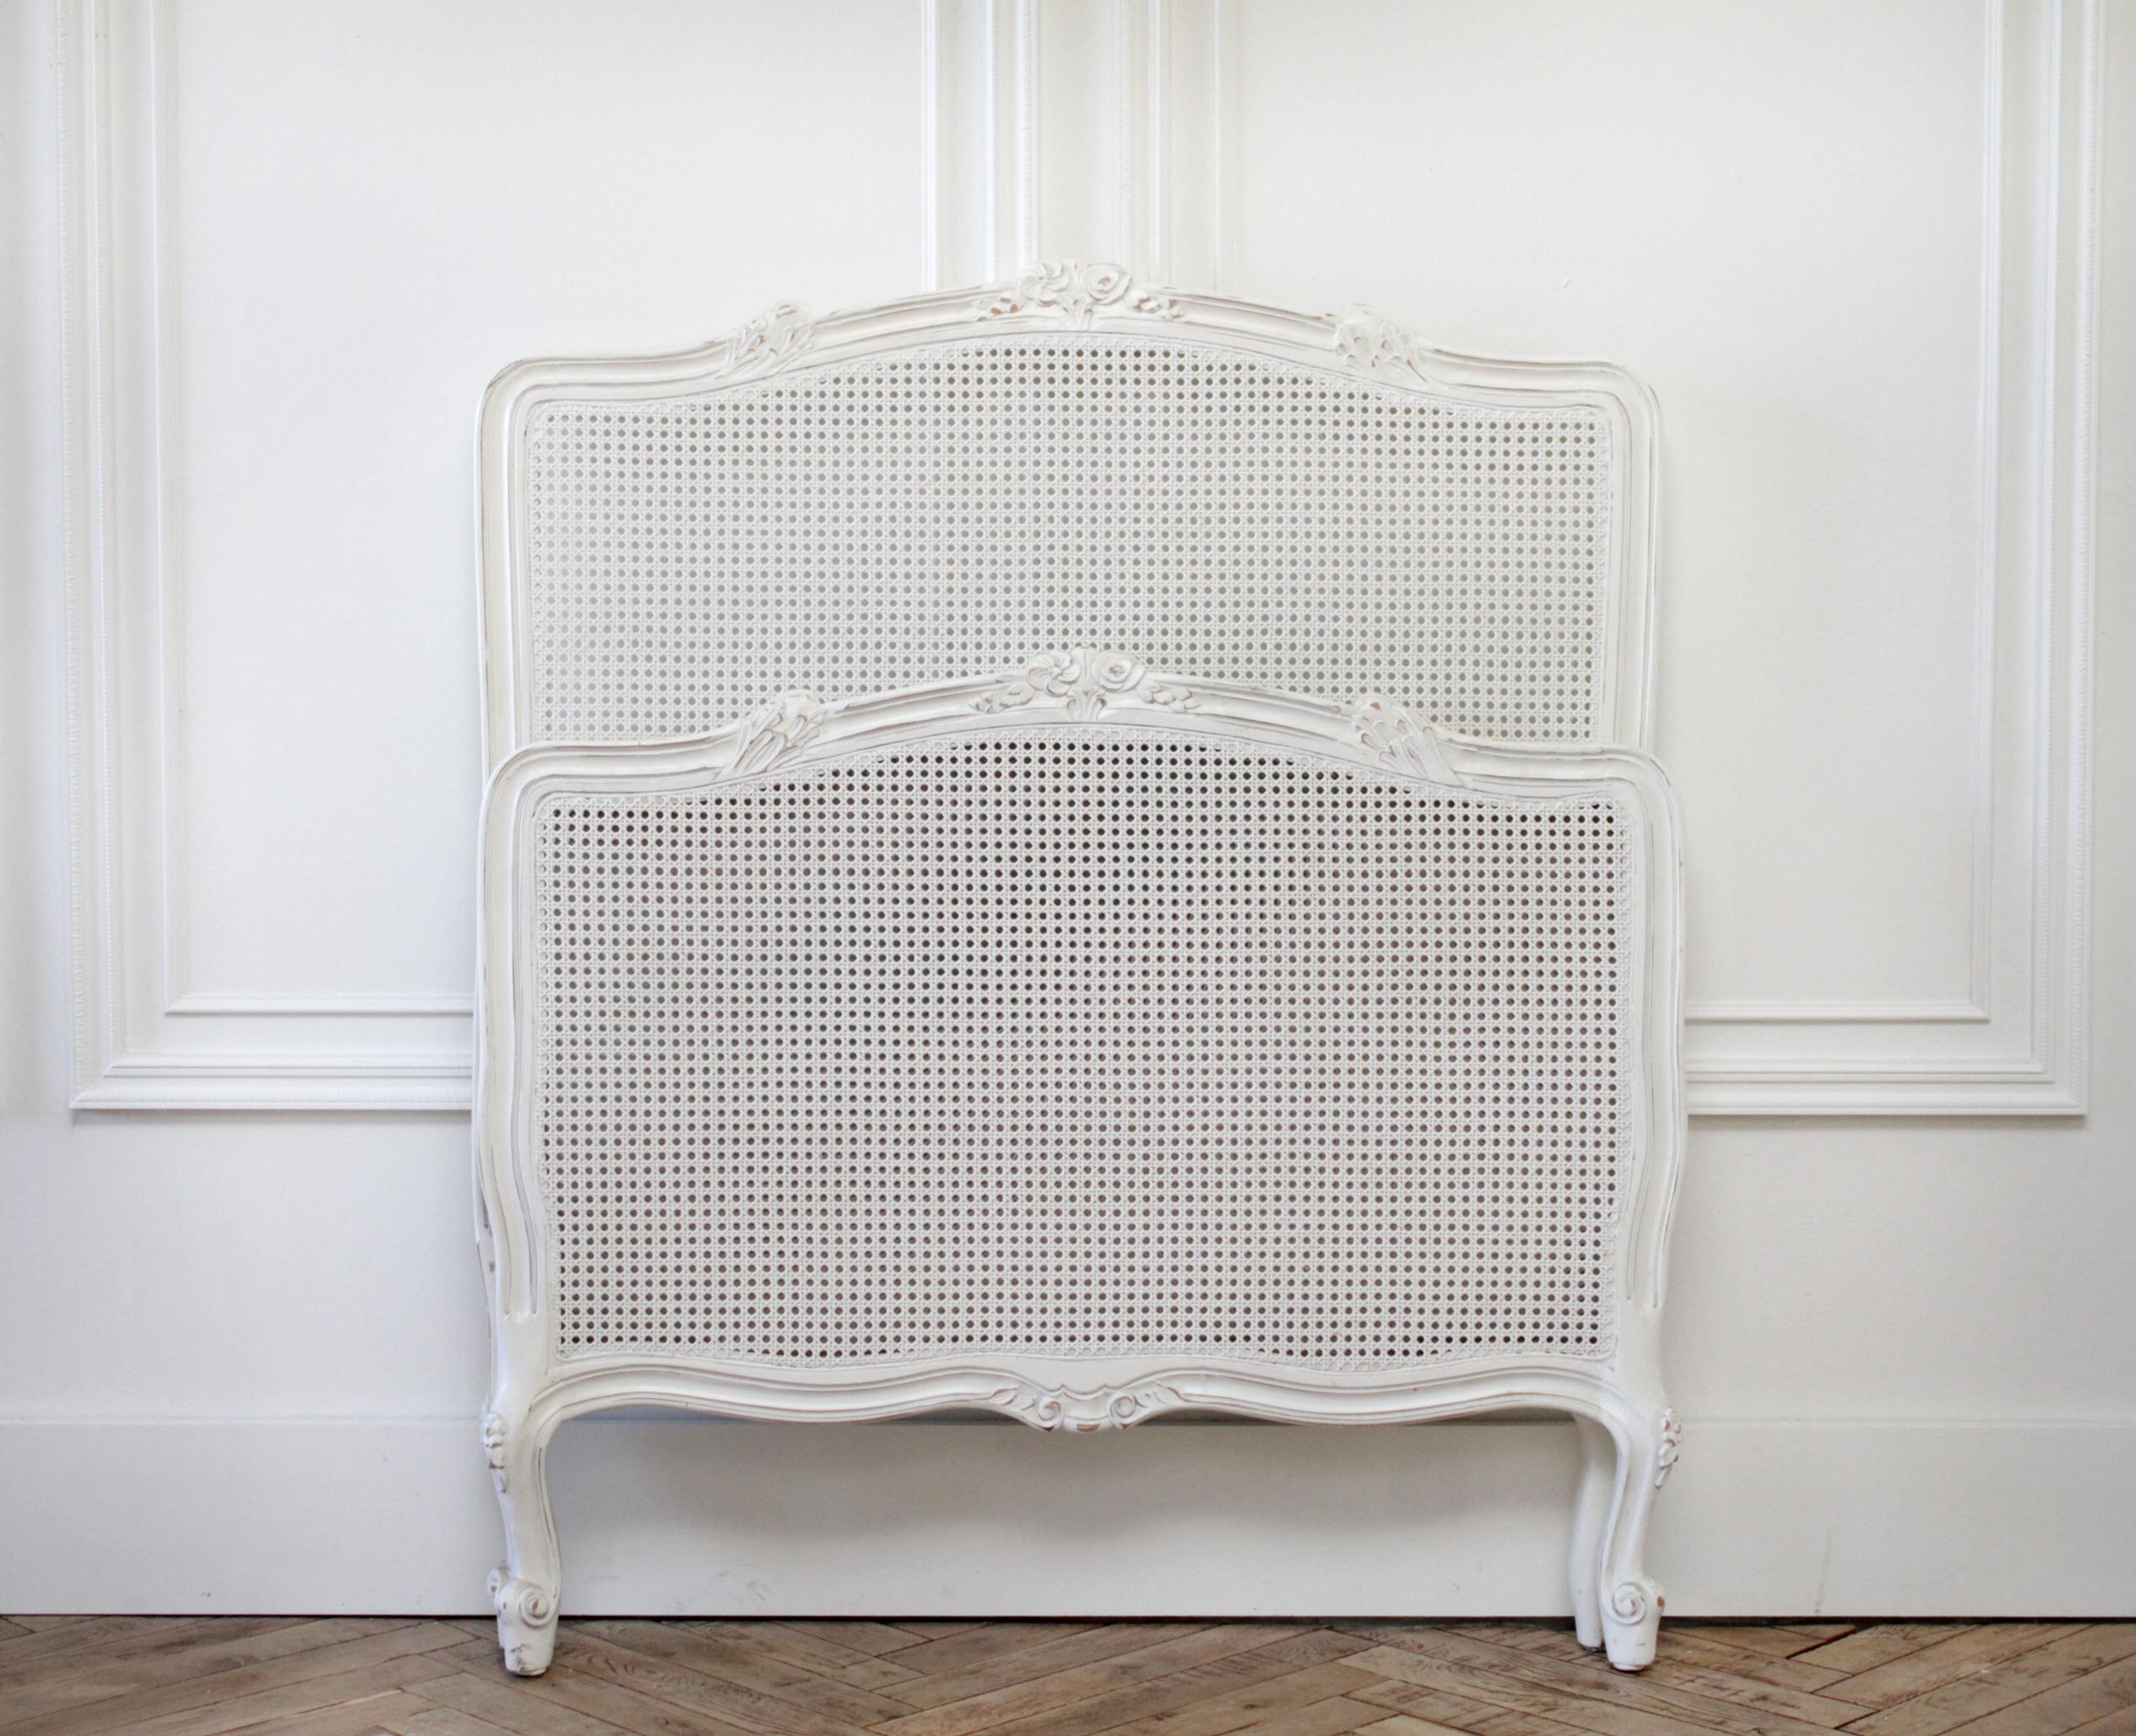 Reproduction twin carved and painted Louis XV style French bed with cane.
Painted white with subtle distressed edges, this bed has delicate carved flowers at the top, with a cane headboard and footboard. Cane is in good condition.
Measures: 43